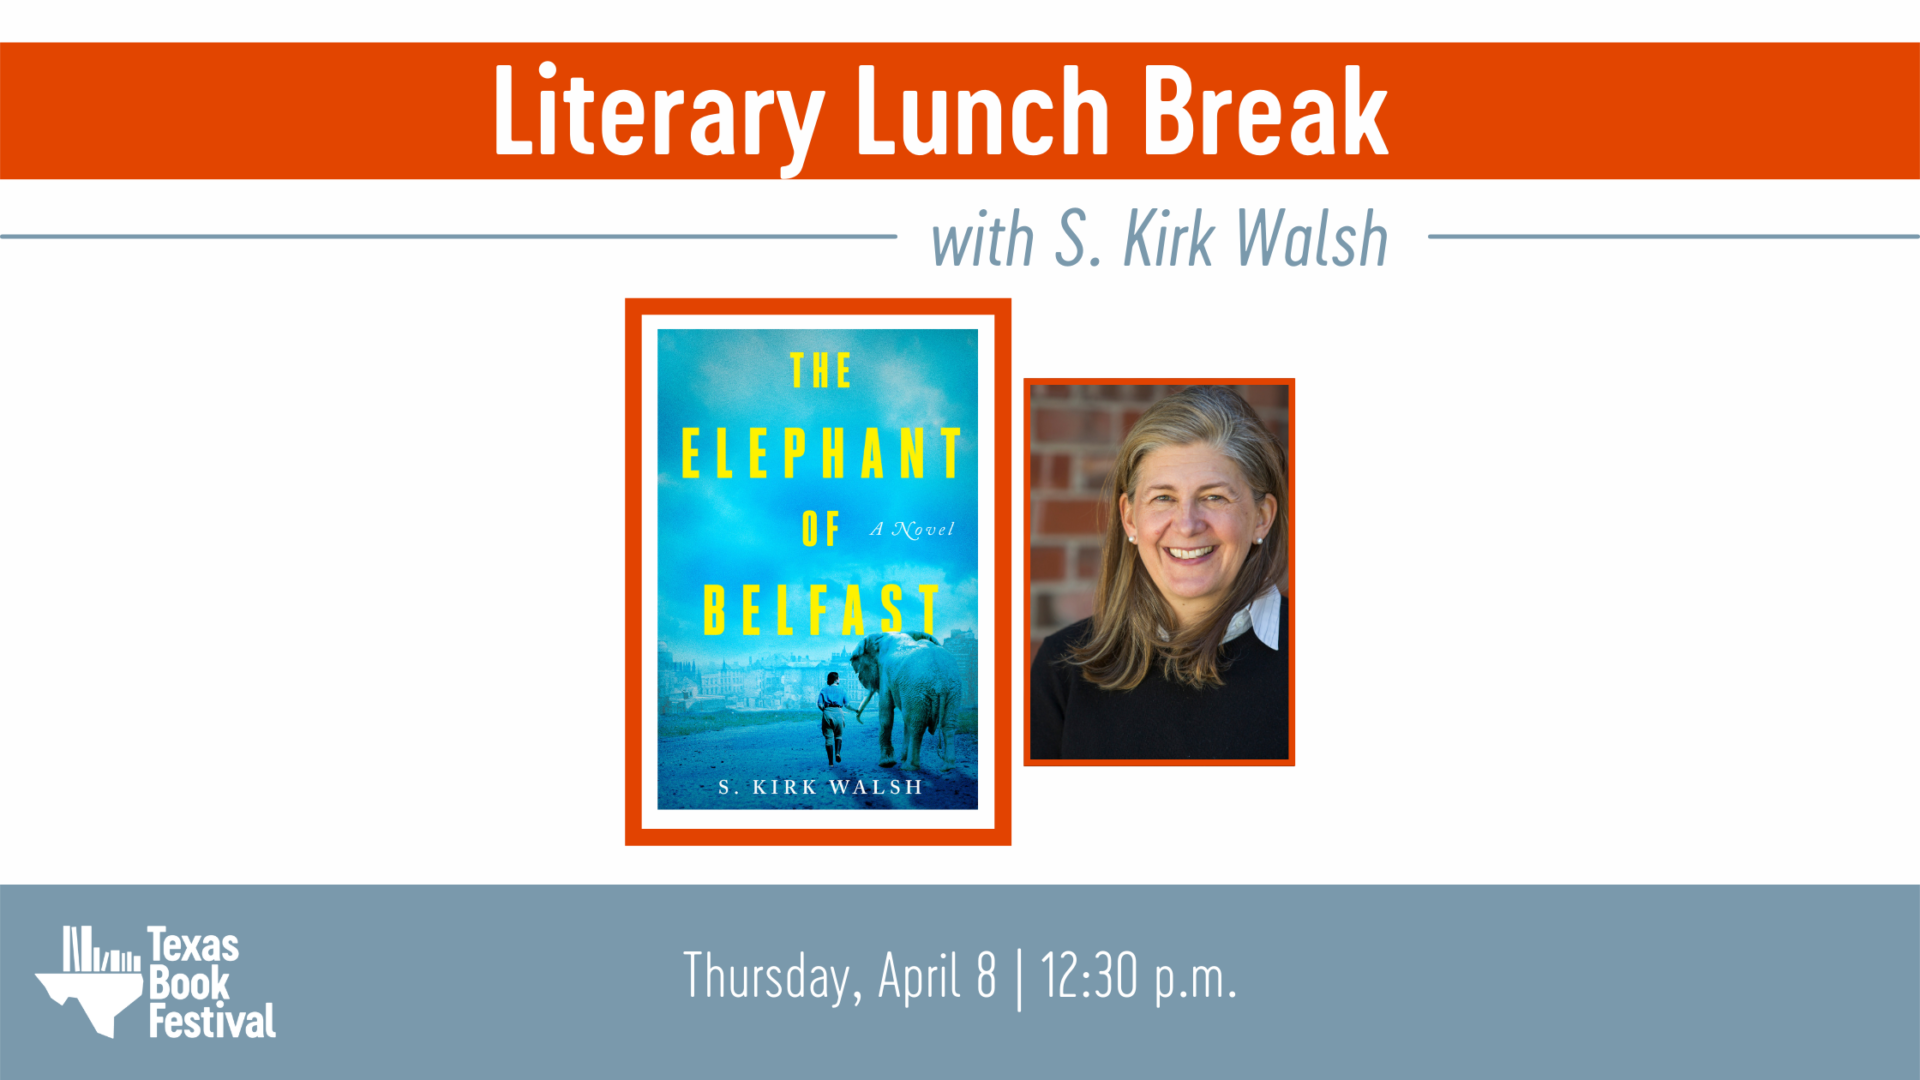 Take a Literary Lunch Break with S. Kirk Walsh